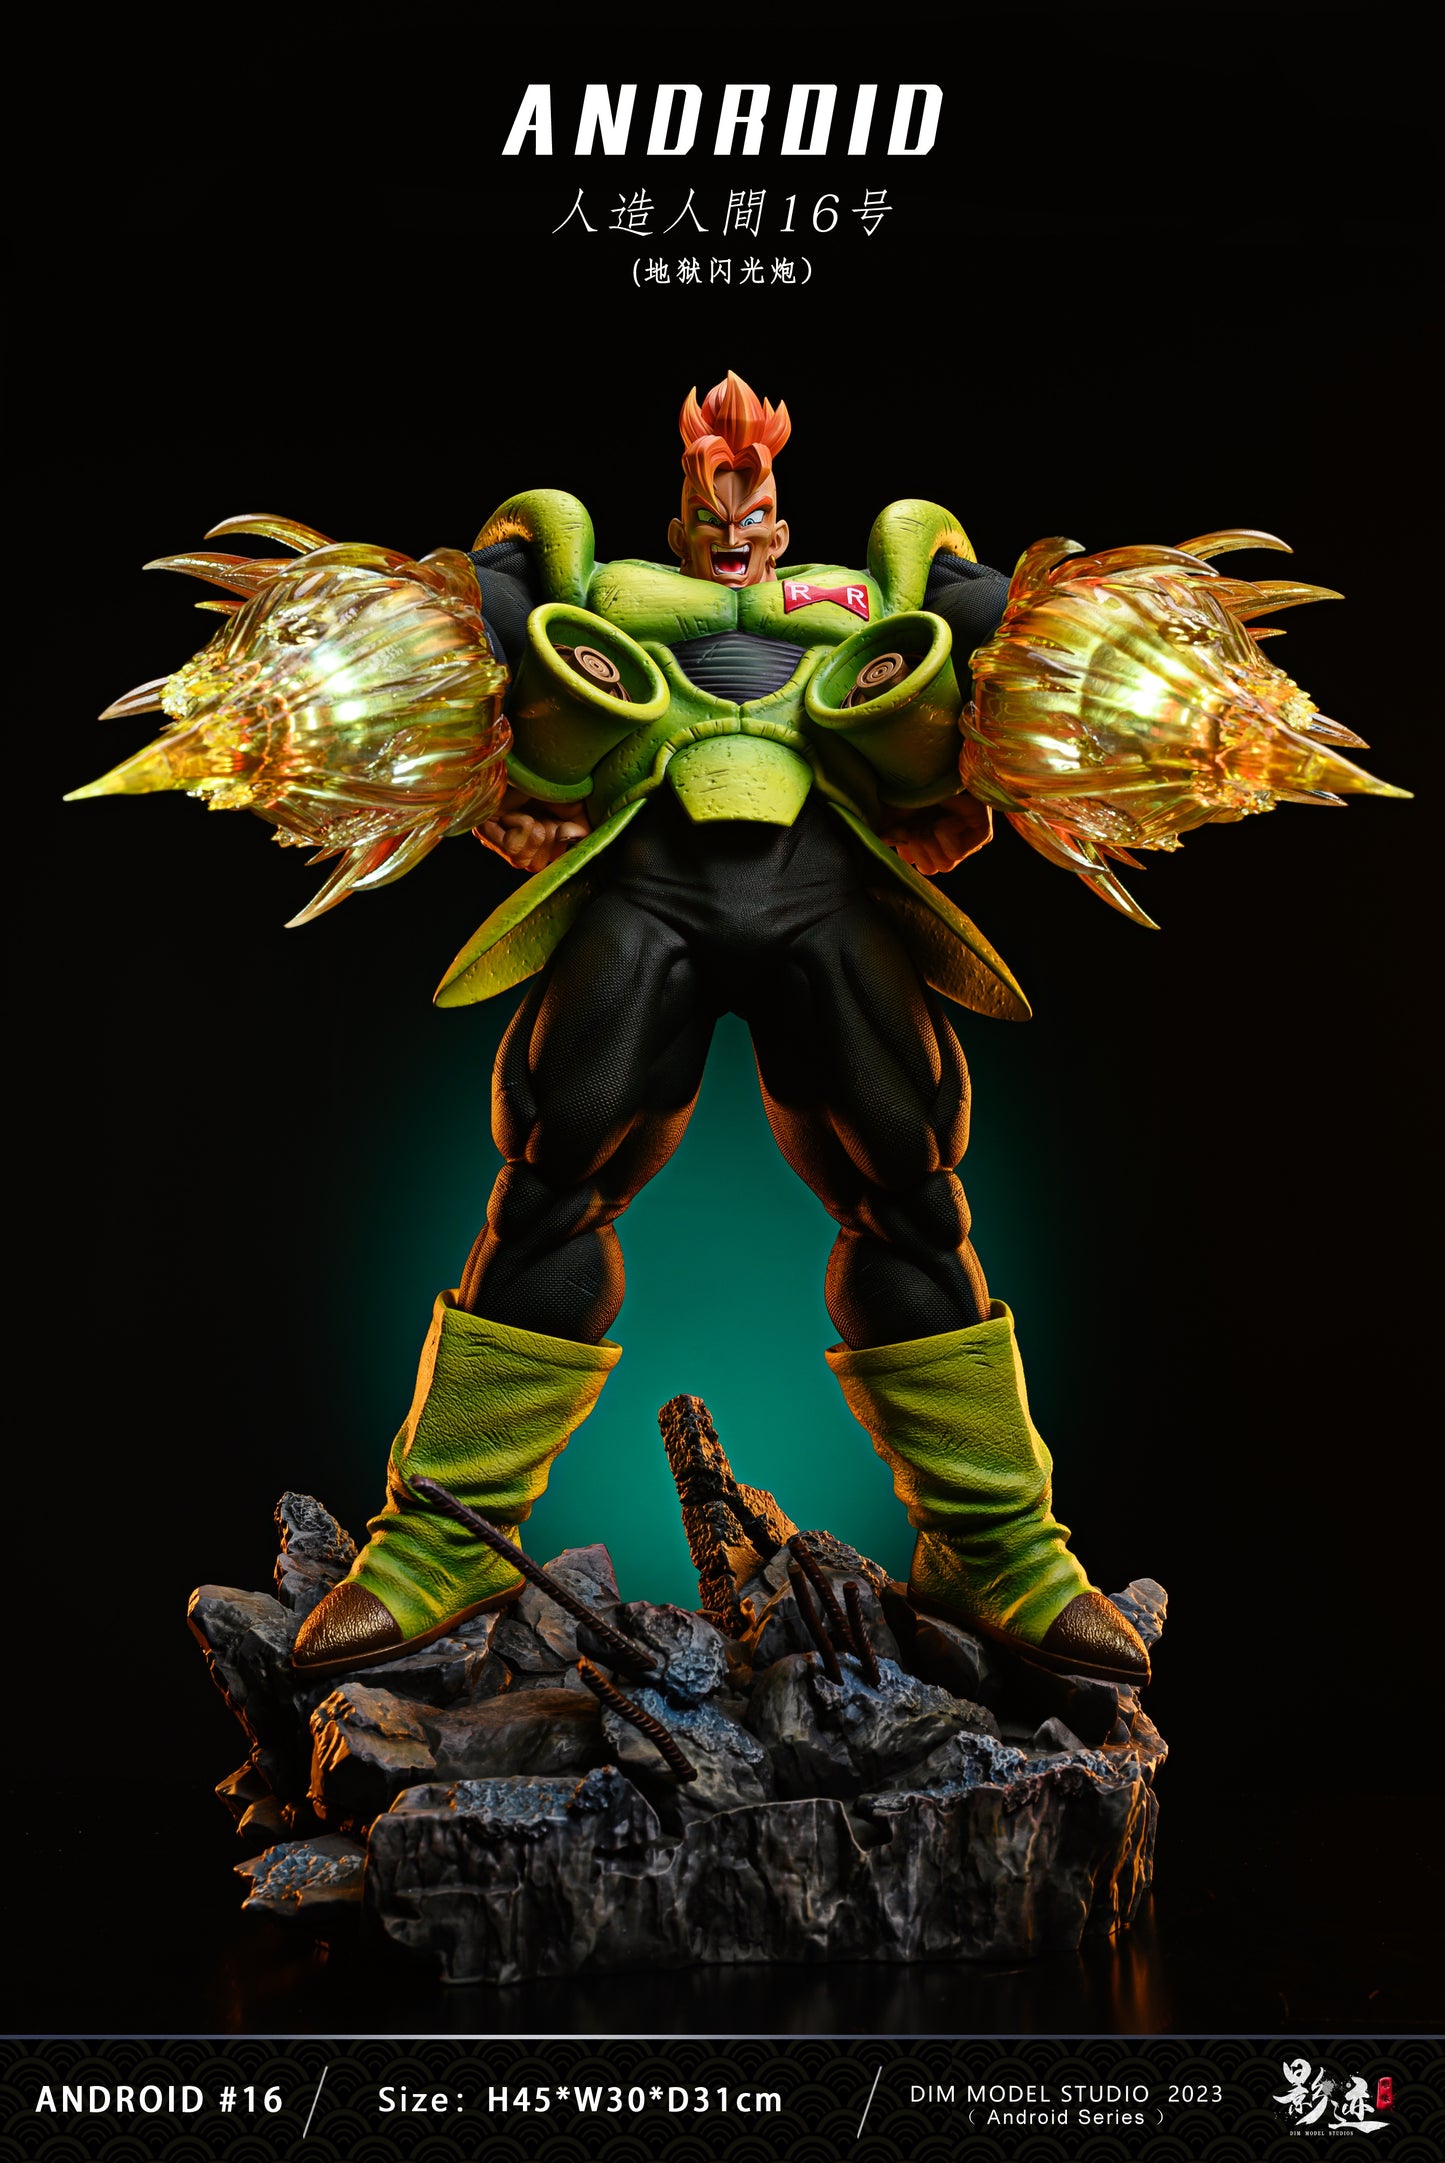 DIM MODEL STUDIO – DRAGON BALL Z: ANDROID SERIES 1. HELL’S FLASH ANDROID 16 [PRE-ORDER]